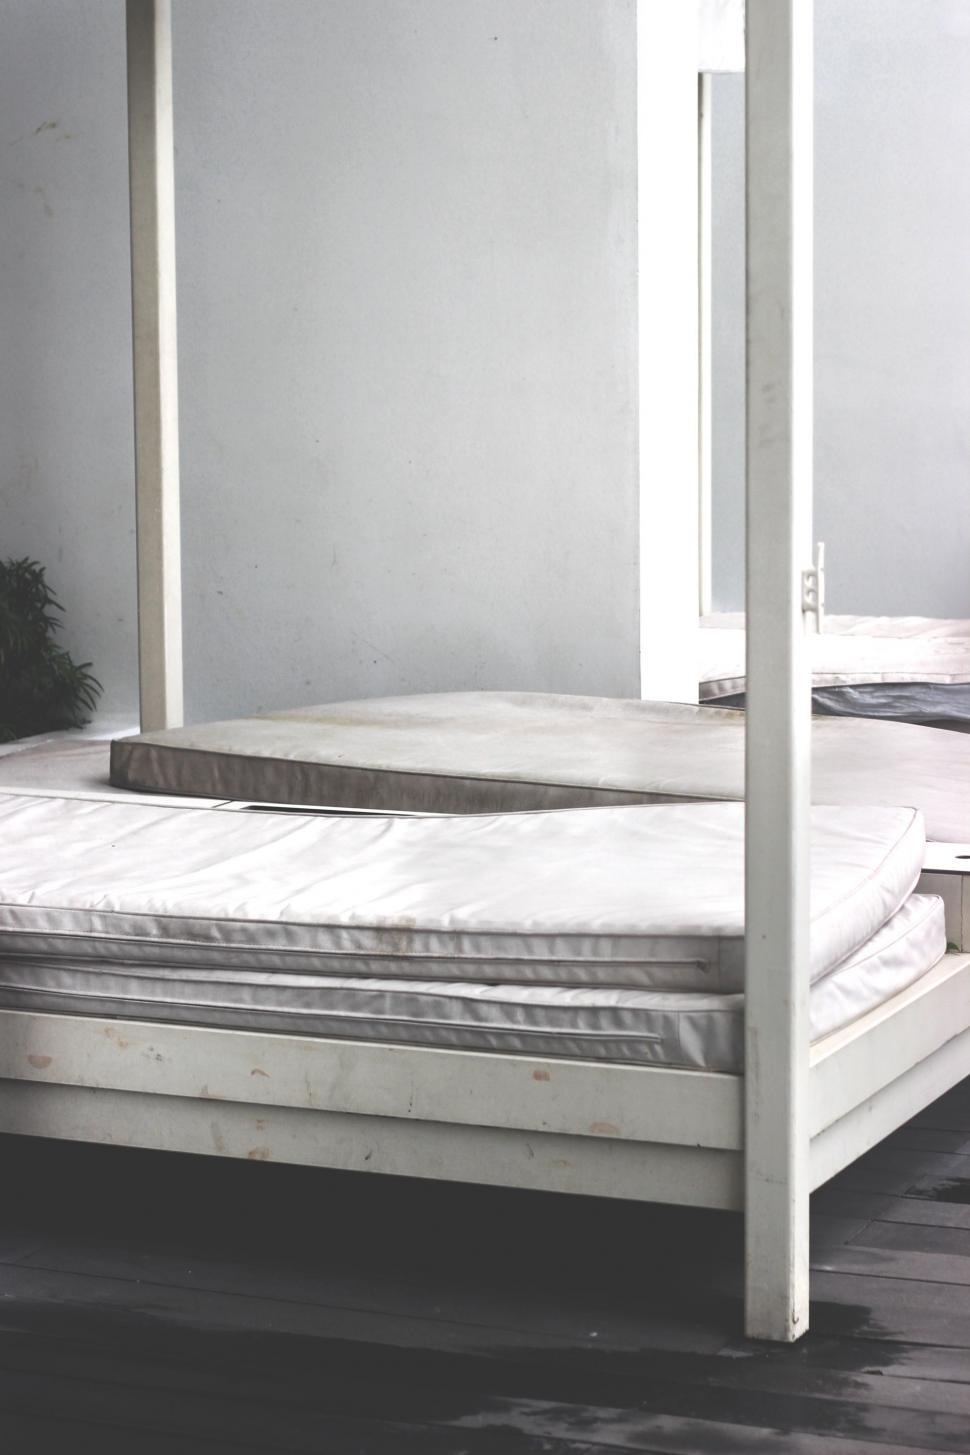 Free Image of Vintage Four Poster Bed in Black and White 